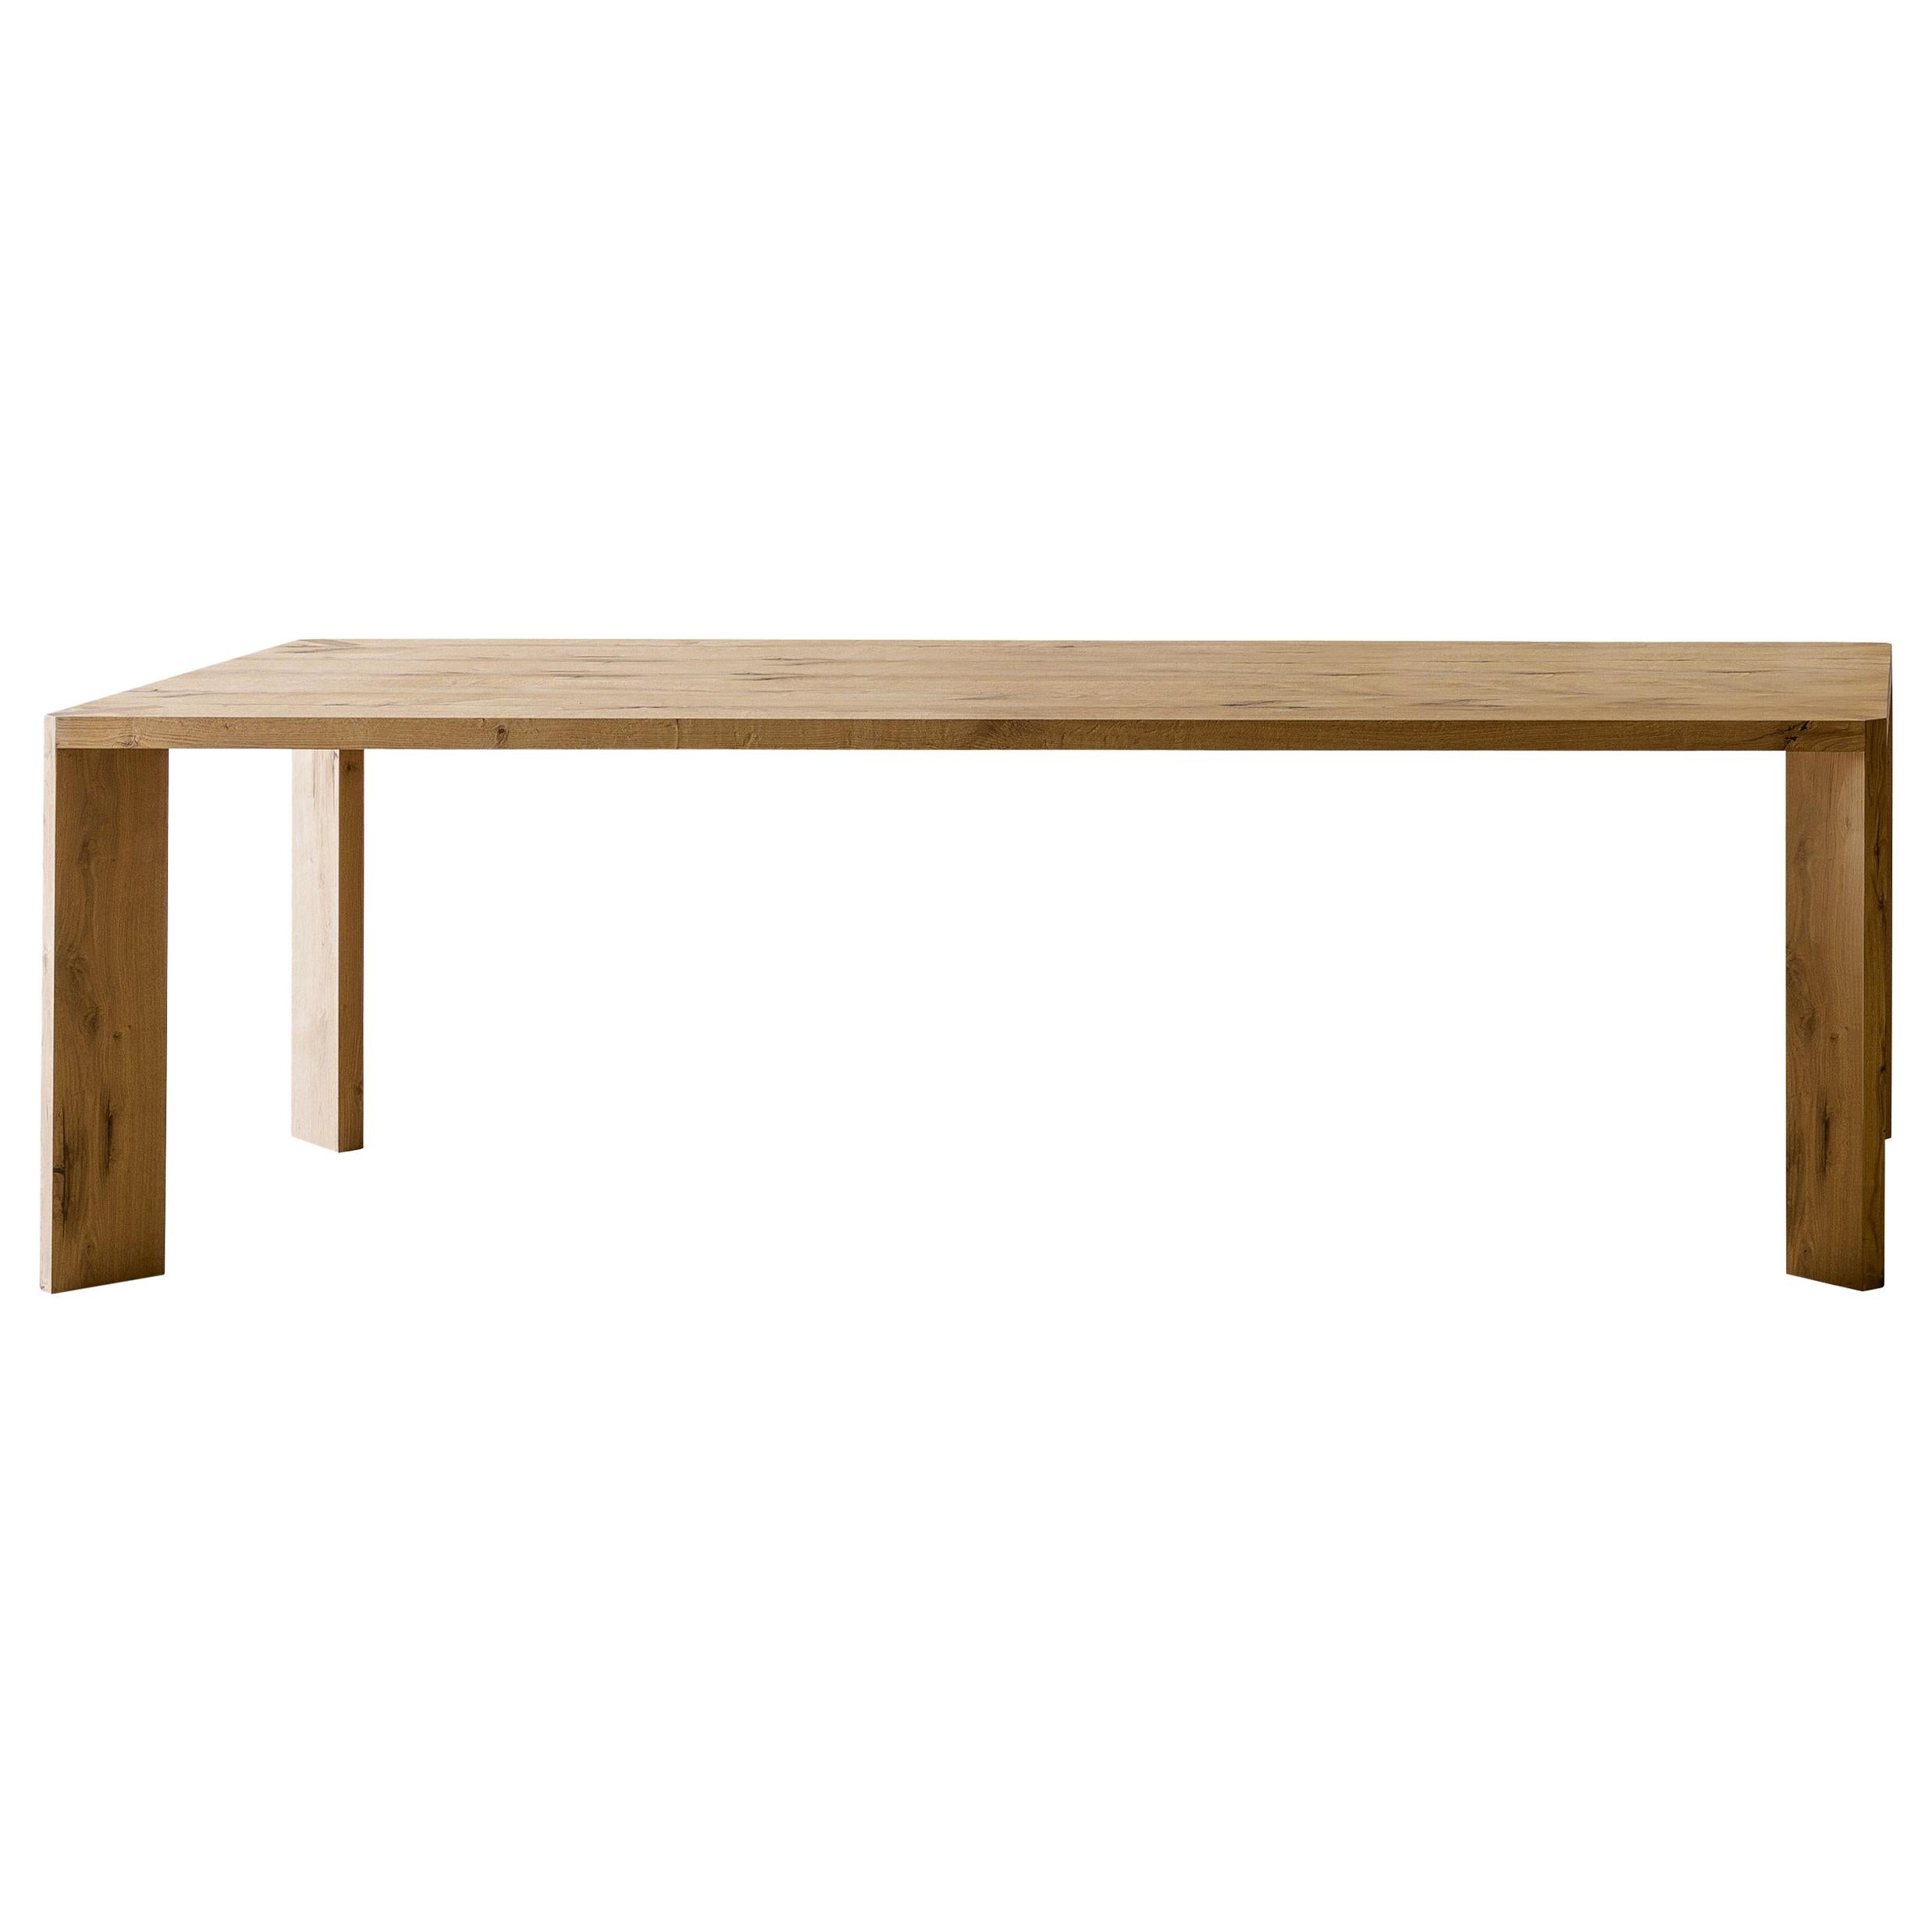 Manero Large Table in Vintage Oak by Paolo Cappello